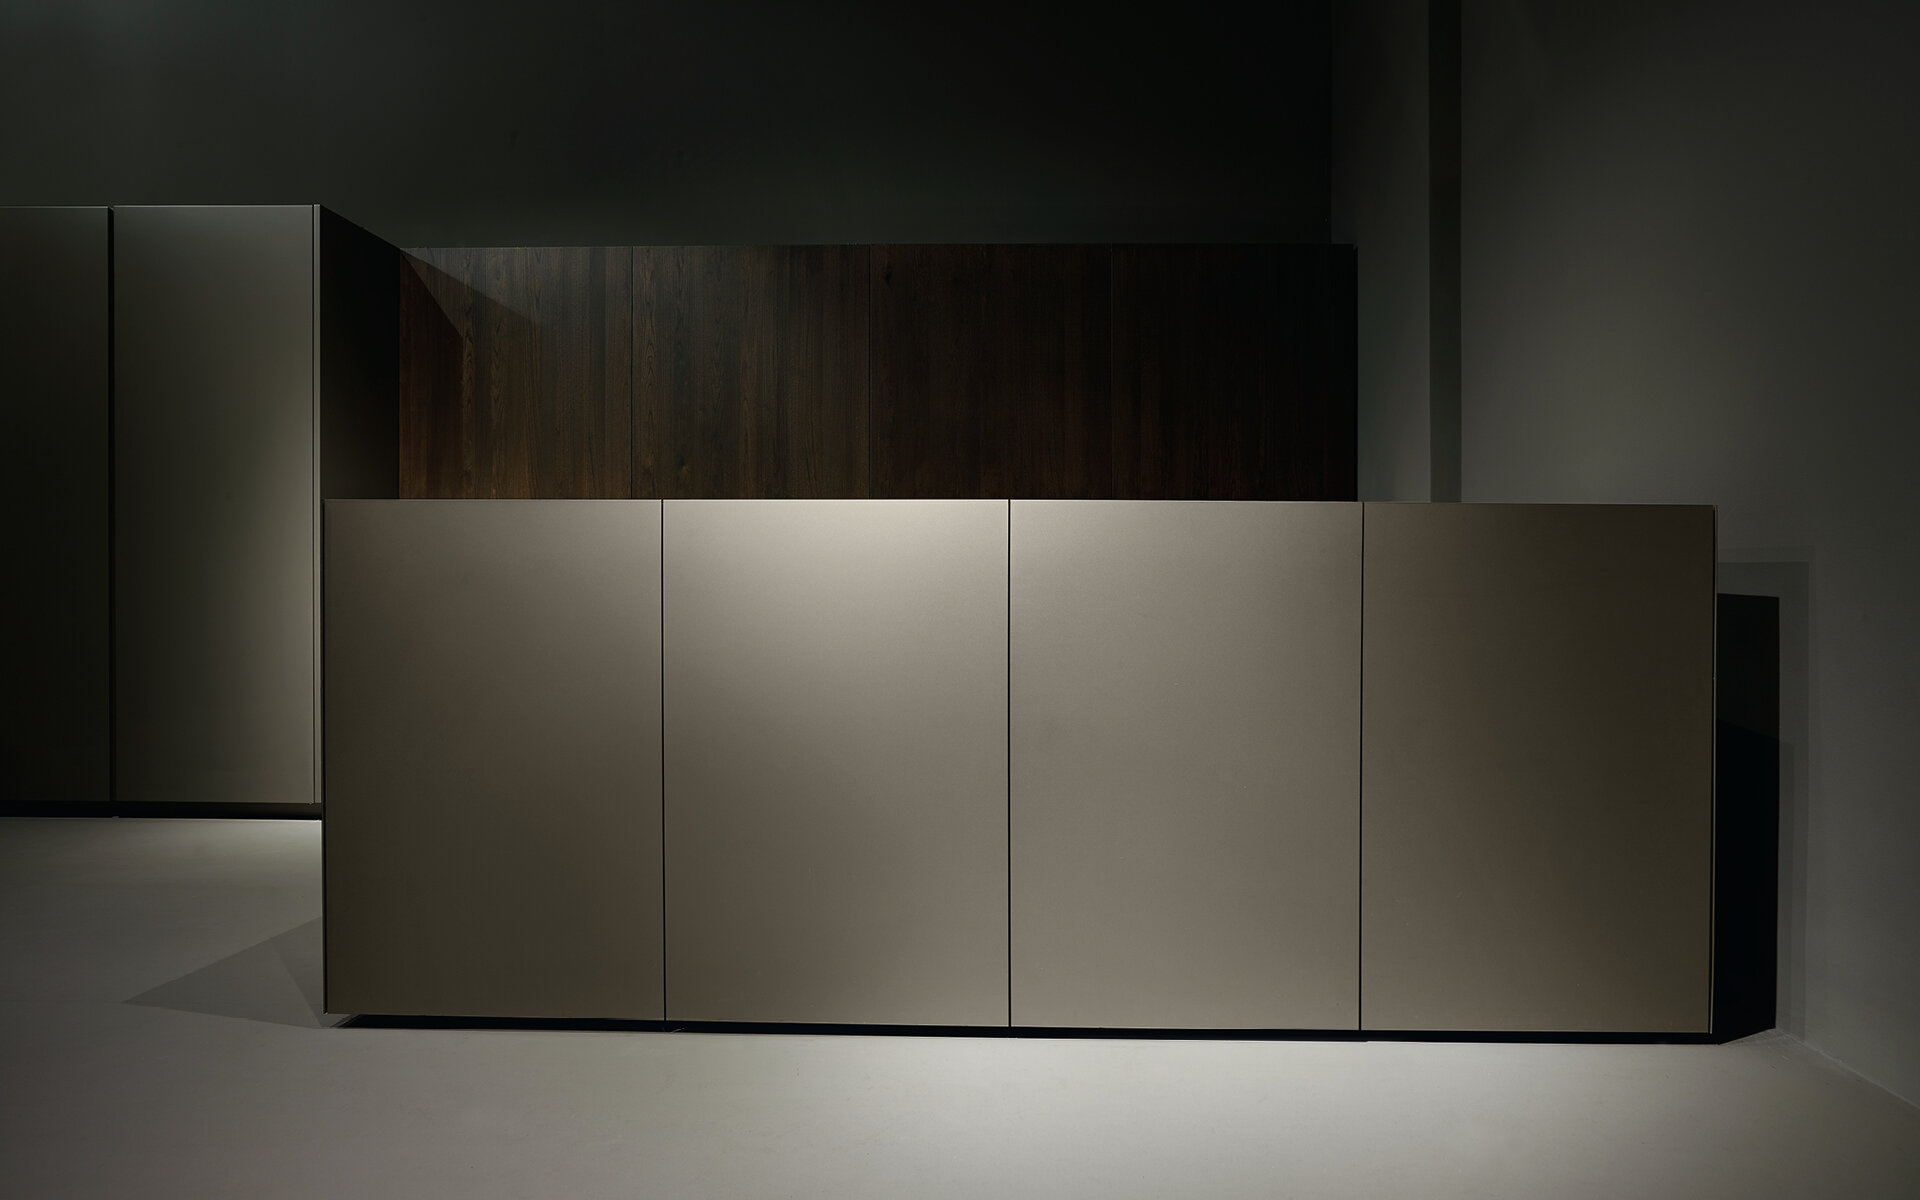 maya is a sculptural piece of furniture conceived as a series of volumes available at different heights and depths. 

the aluminium door and its junction with the worktop negate the need for additional handle profiles, minimising visual interference.